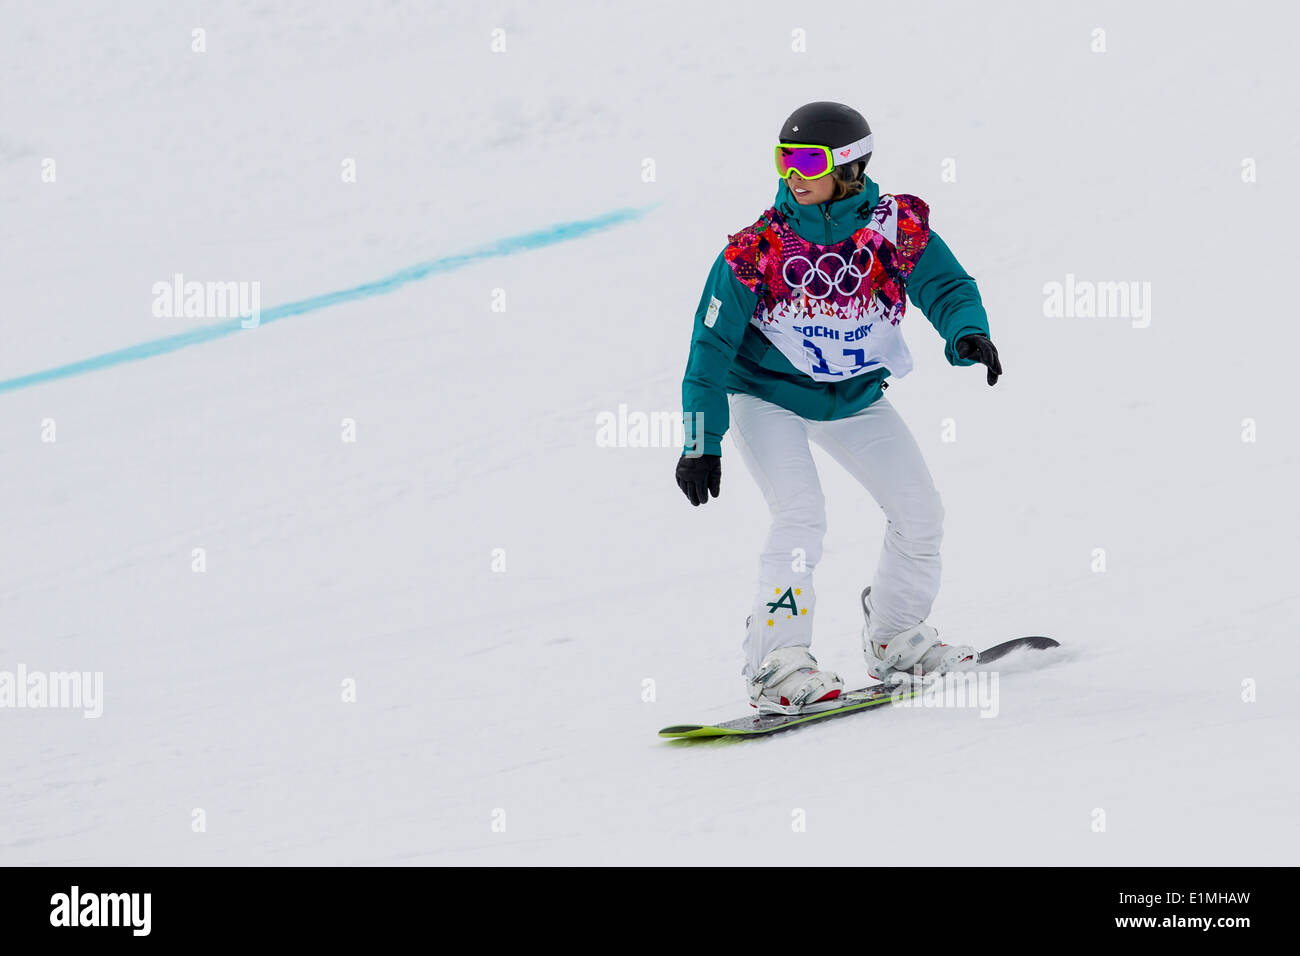 Torah Bright (AUS) competing in Ladies's Snowboard Slopestyle at the Olympic Winter Games, Sochi 2014 Stock Photo